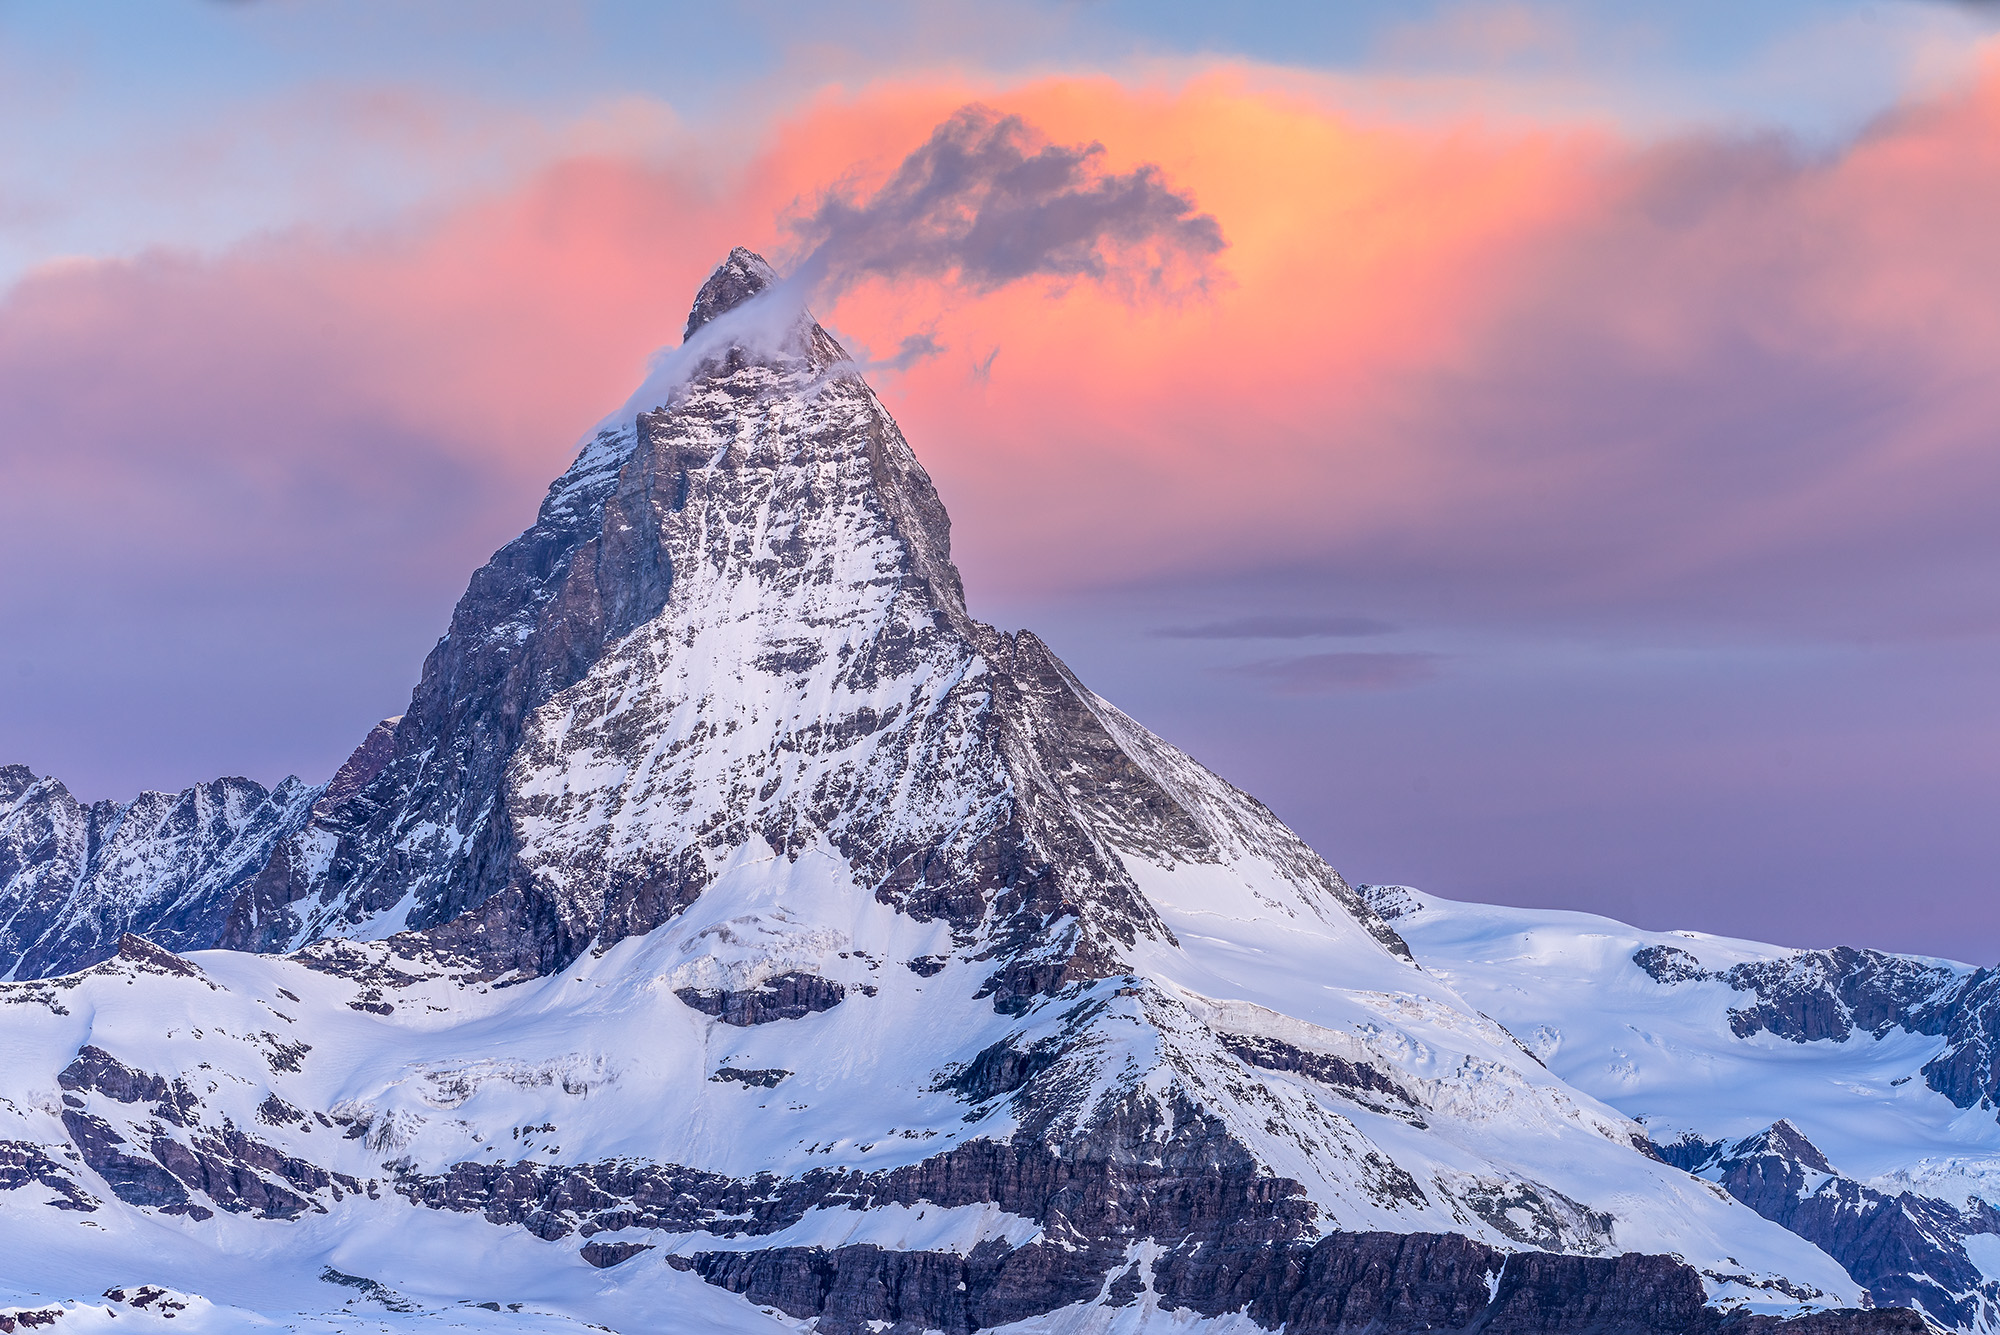 In "Dawn's Embrace of the Matterhorn," the iconic Swiss peak is unveiled in all its glory. As the first light of sunrise graces...